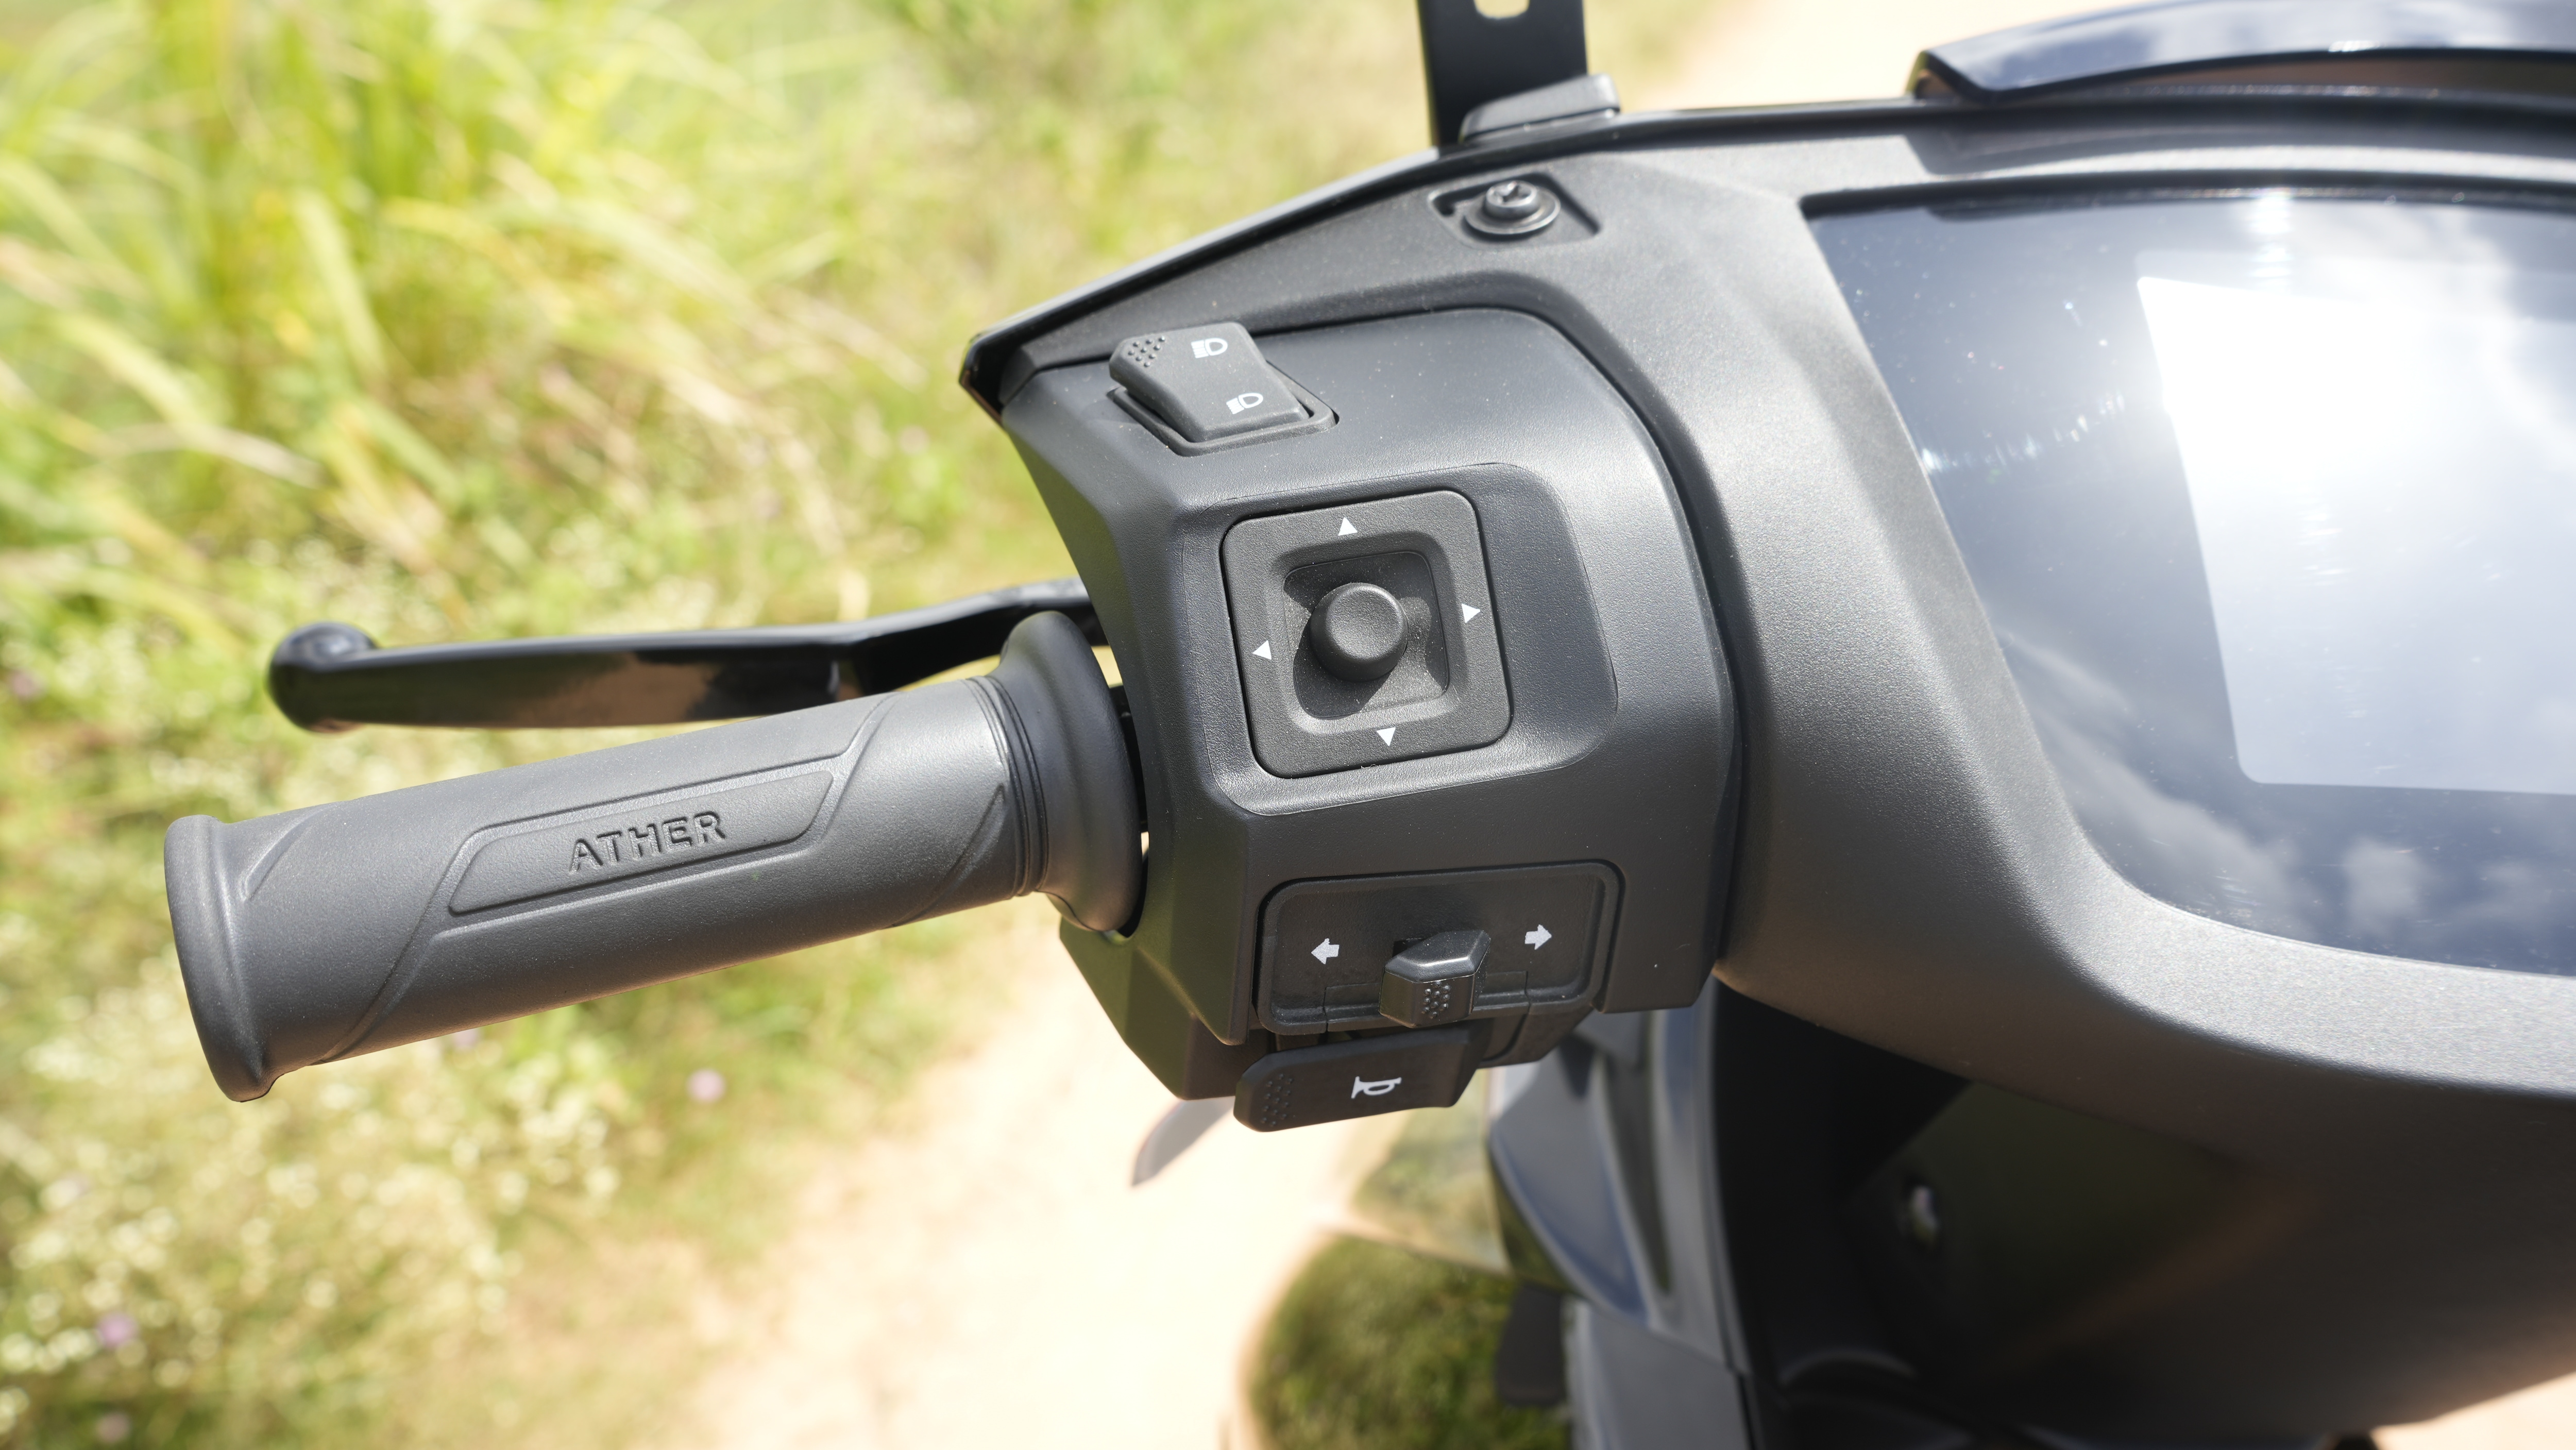 In the absence of a touchscreen display, the joystick acts as a navigator tool for the rider to navigate through the menu and options displayed on the LCD screen.